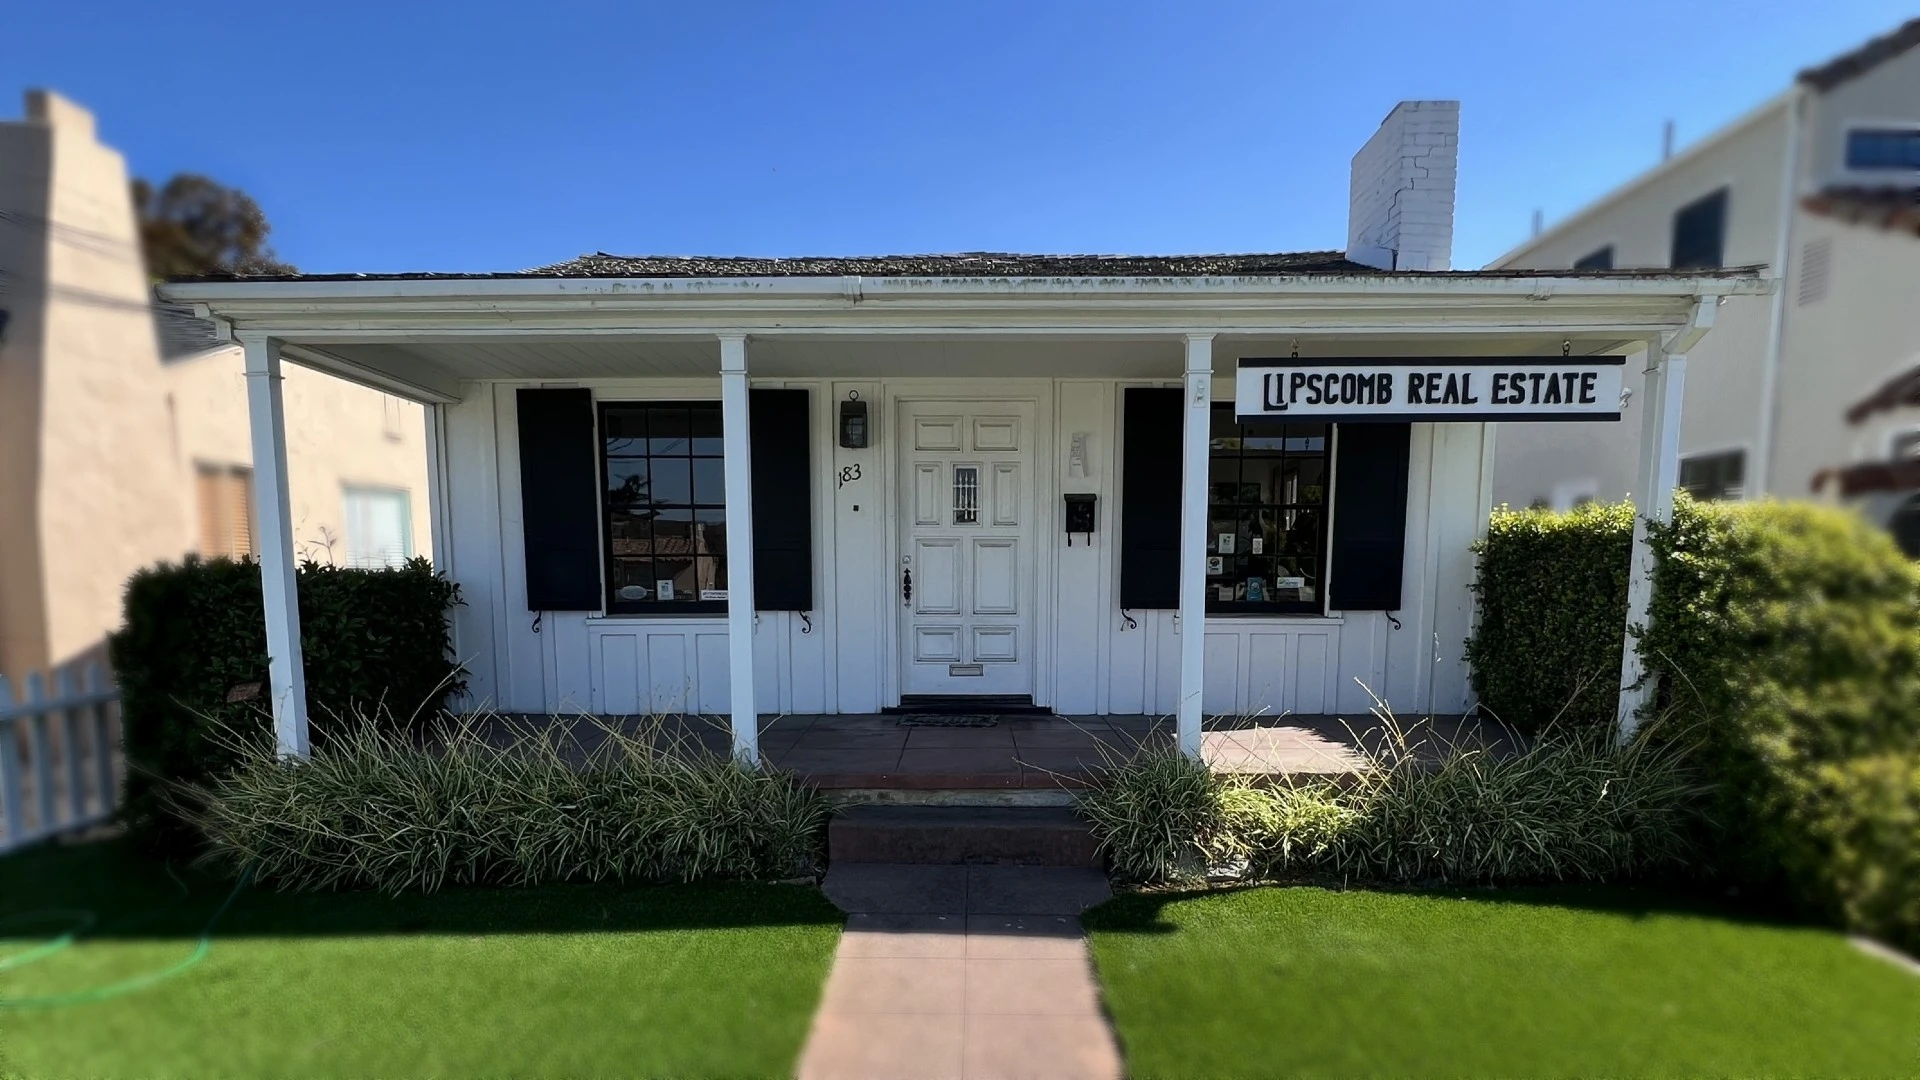 Lipscomb Real Estate Office front view